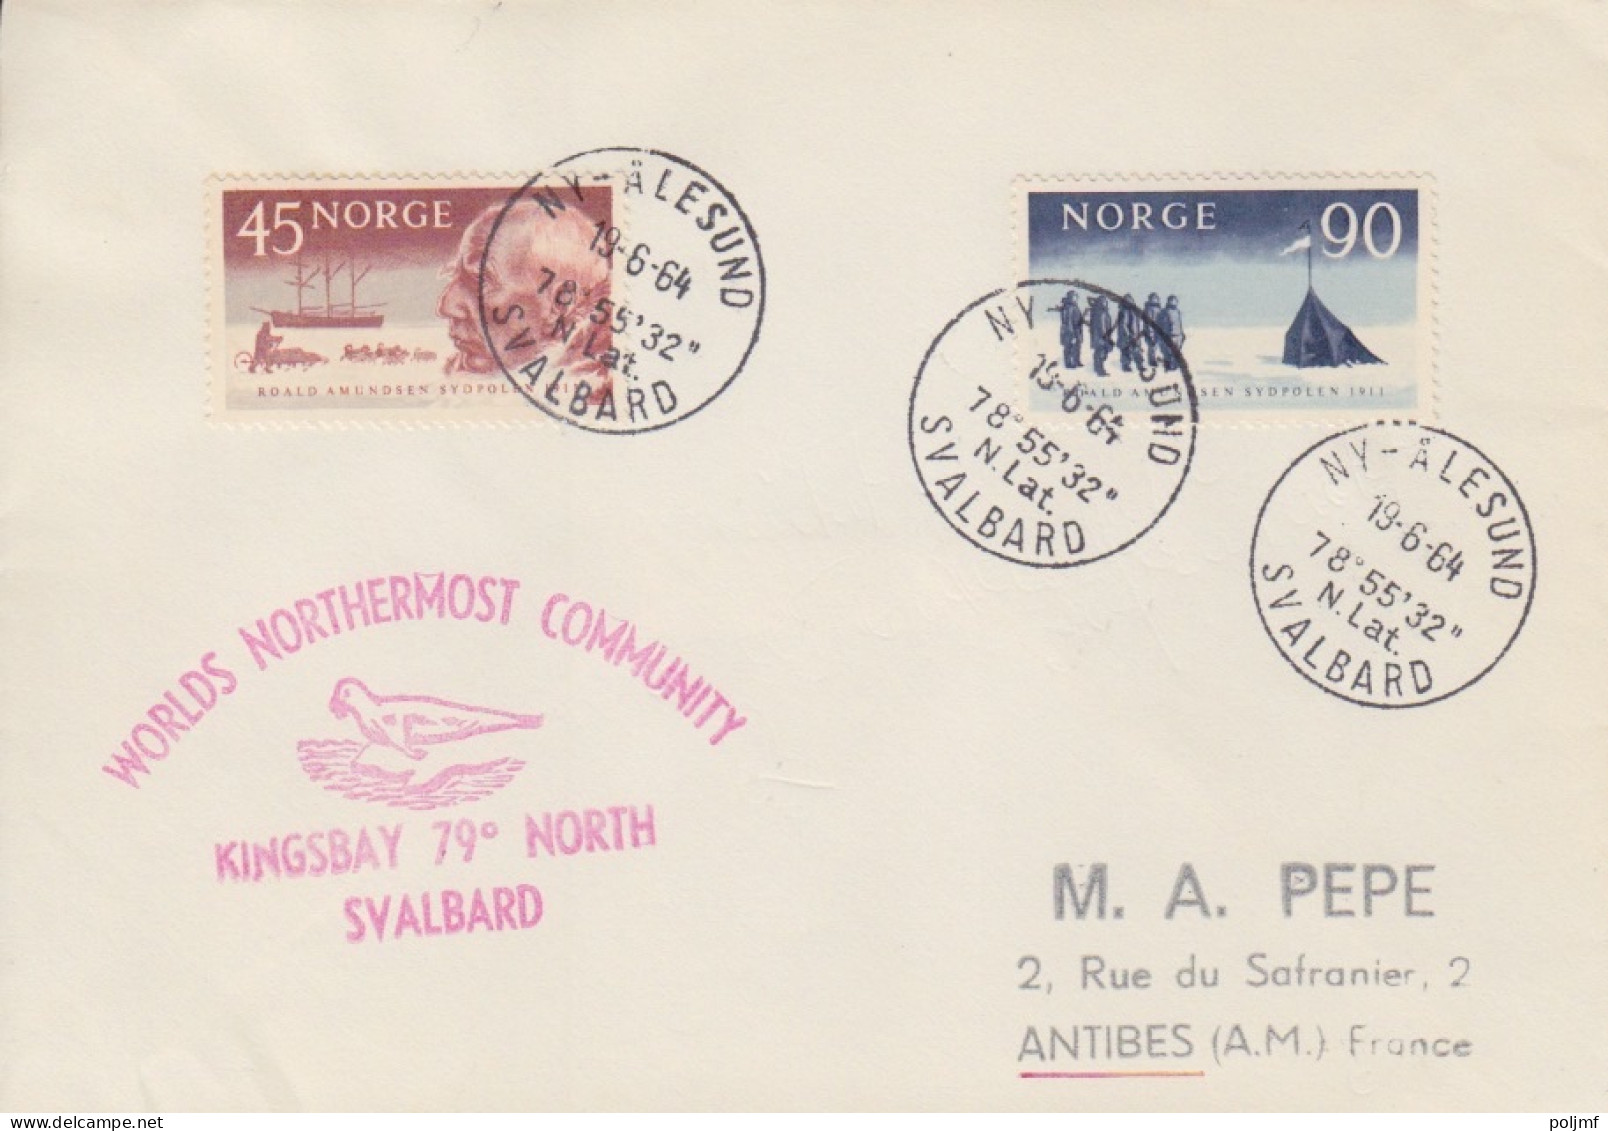 Lettre Obl. Ny Alesund Le 19/6/64 Sur N° 419, 420 (Admunsen) + Cachet Kingsbay 79° North Svalbard - Covers & Documents